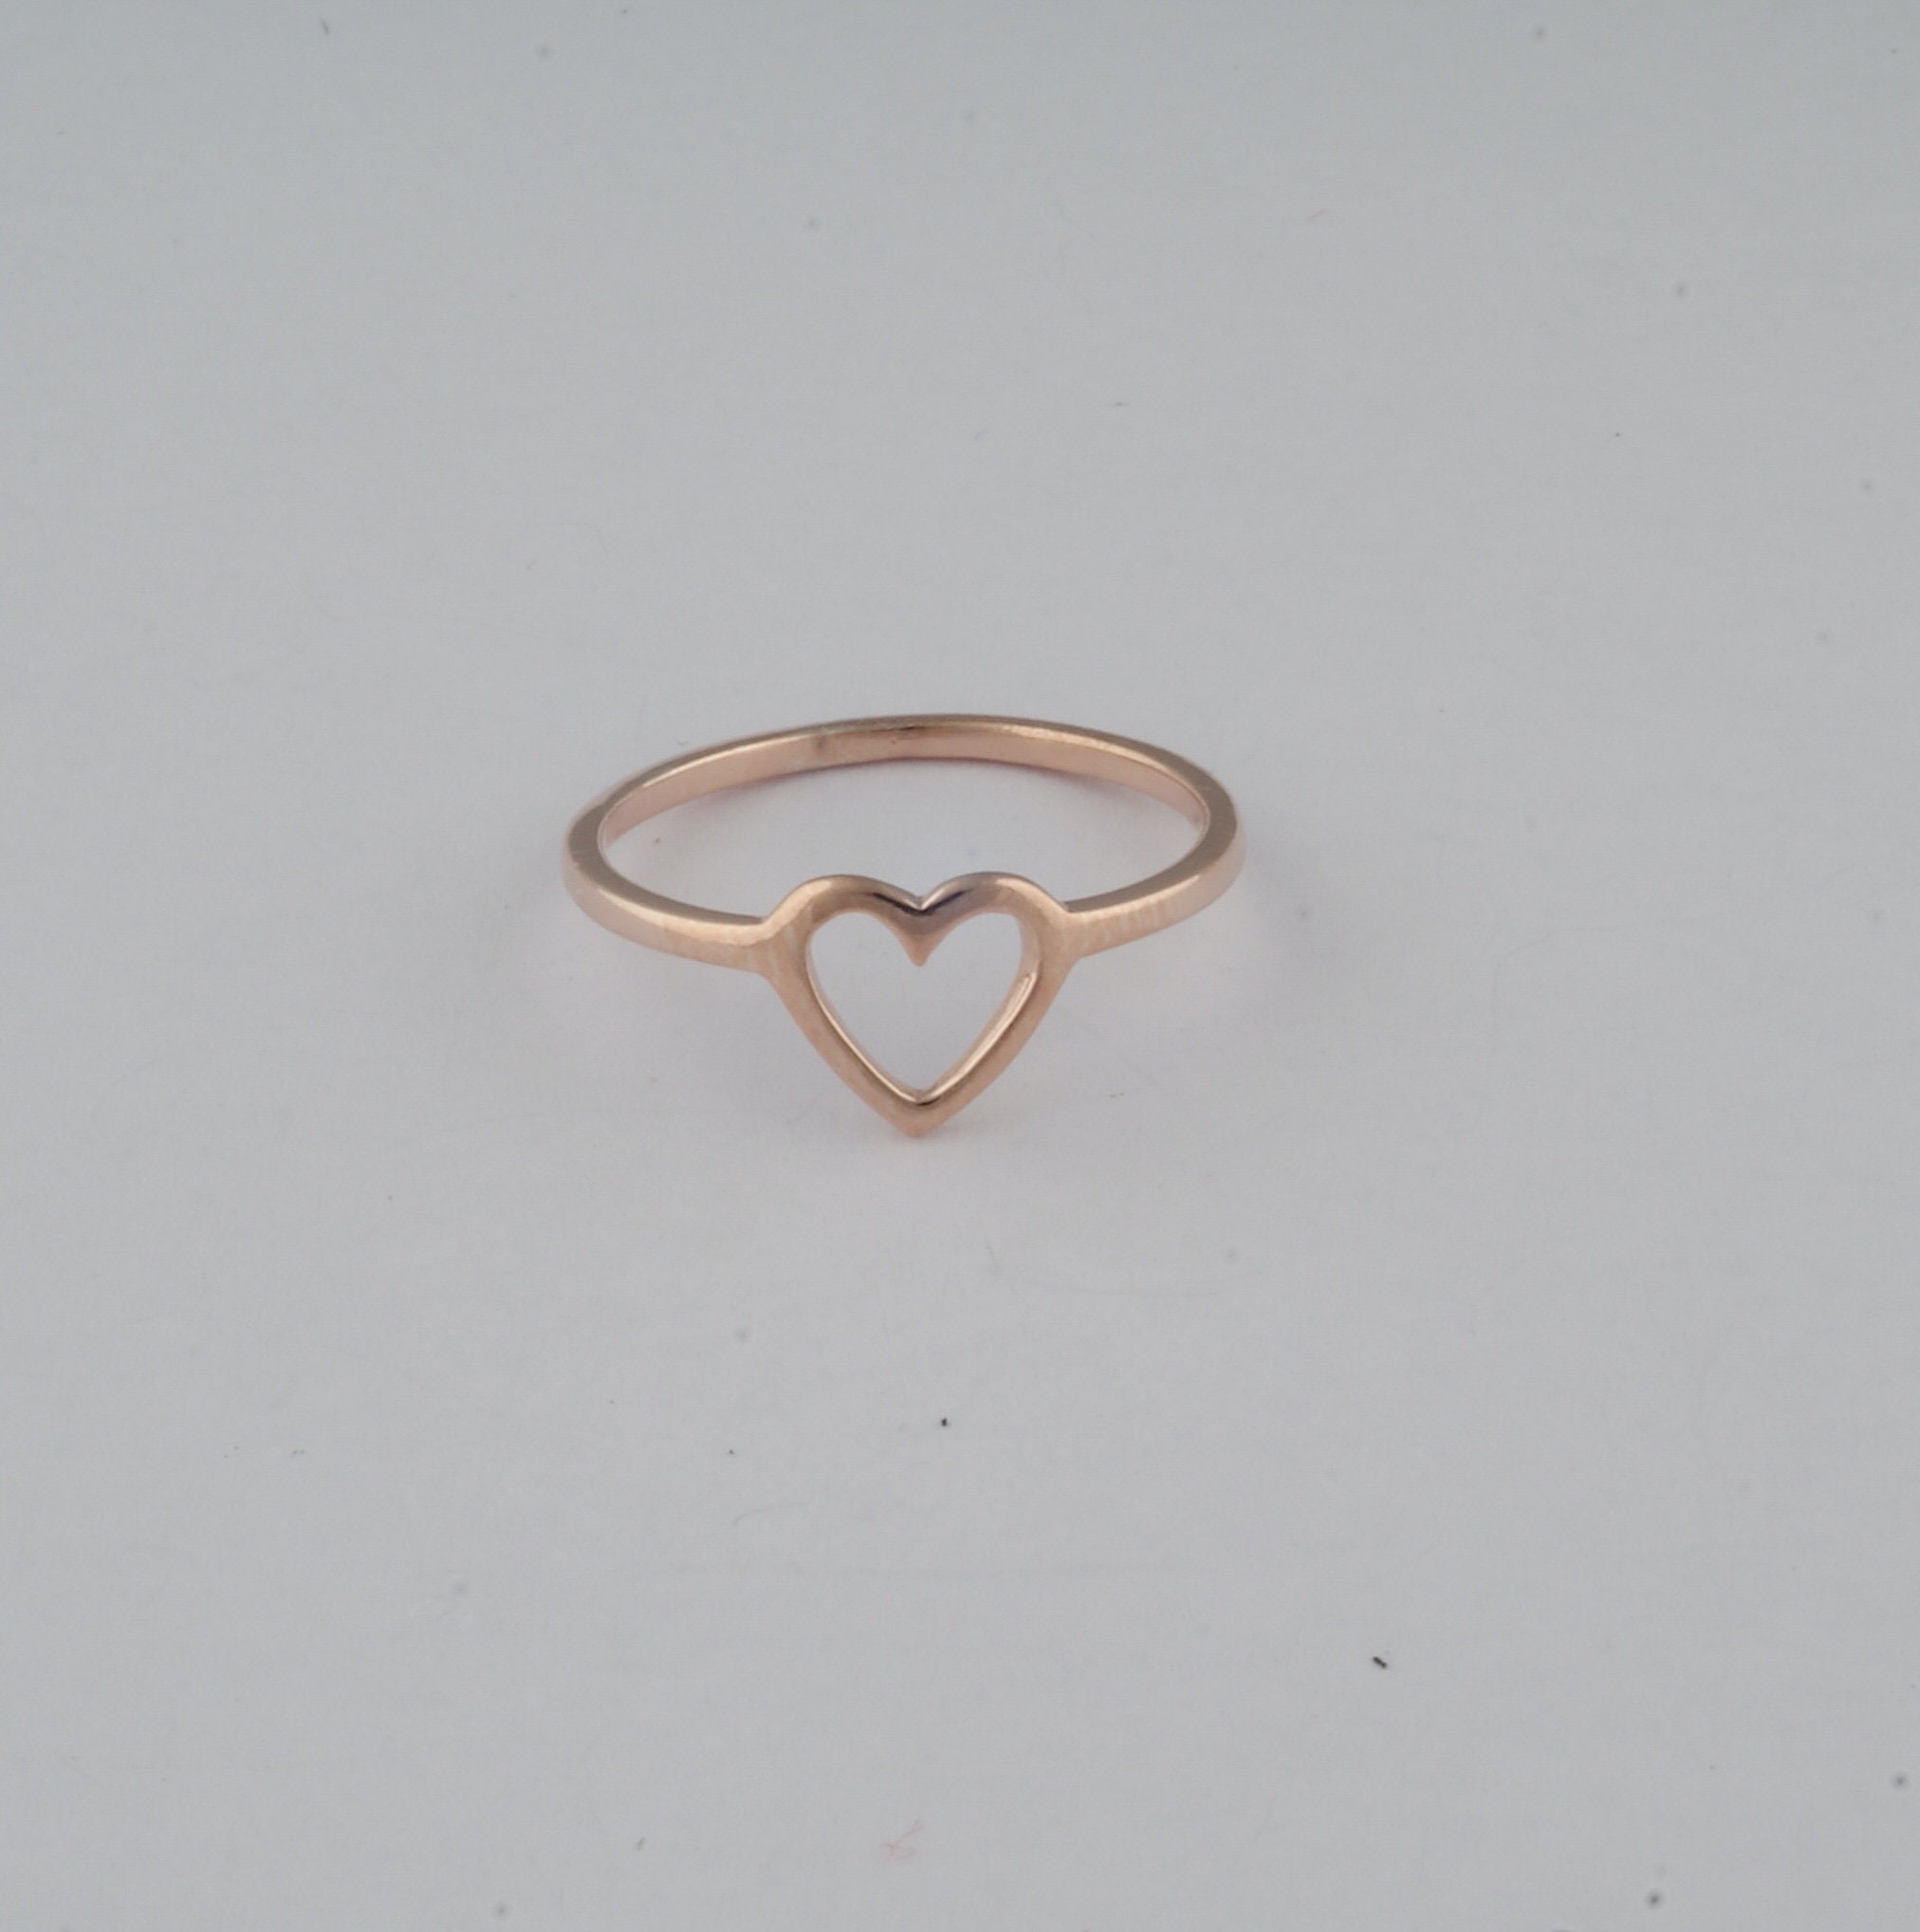 Solid 925 Sterling Silver Heart Ring in US Size 5 10 - Etsy UK